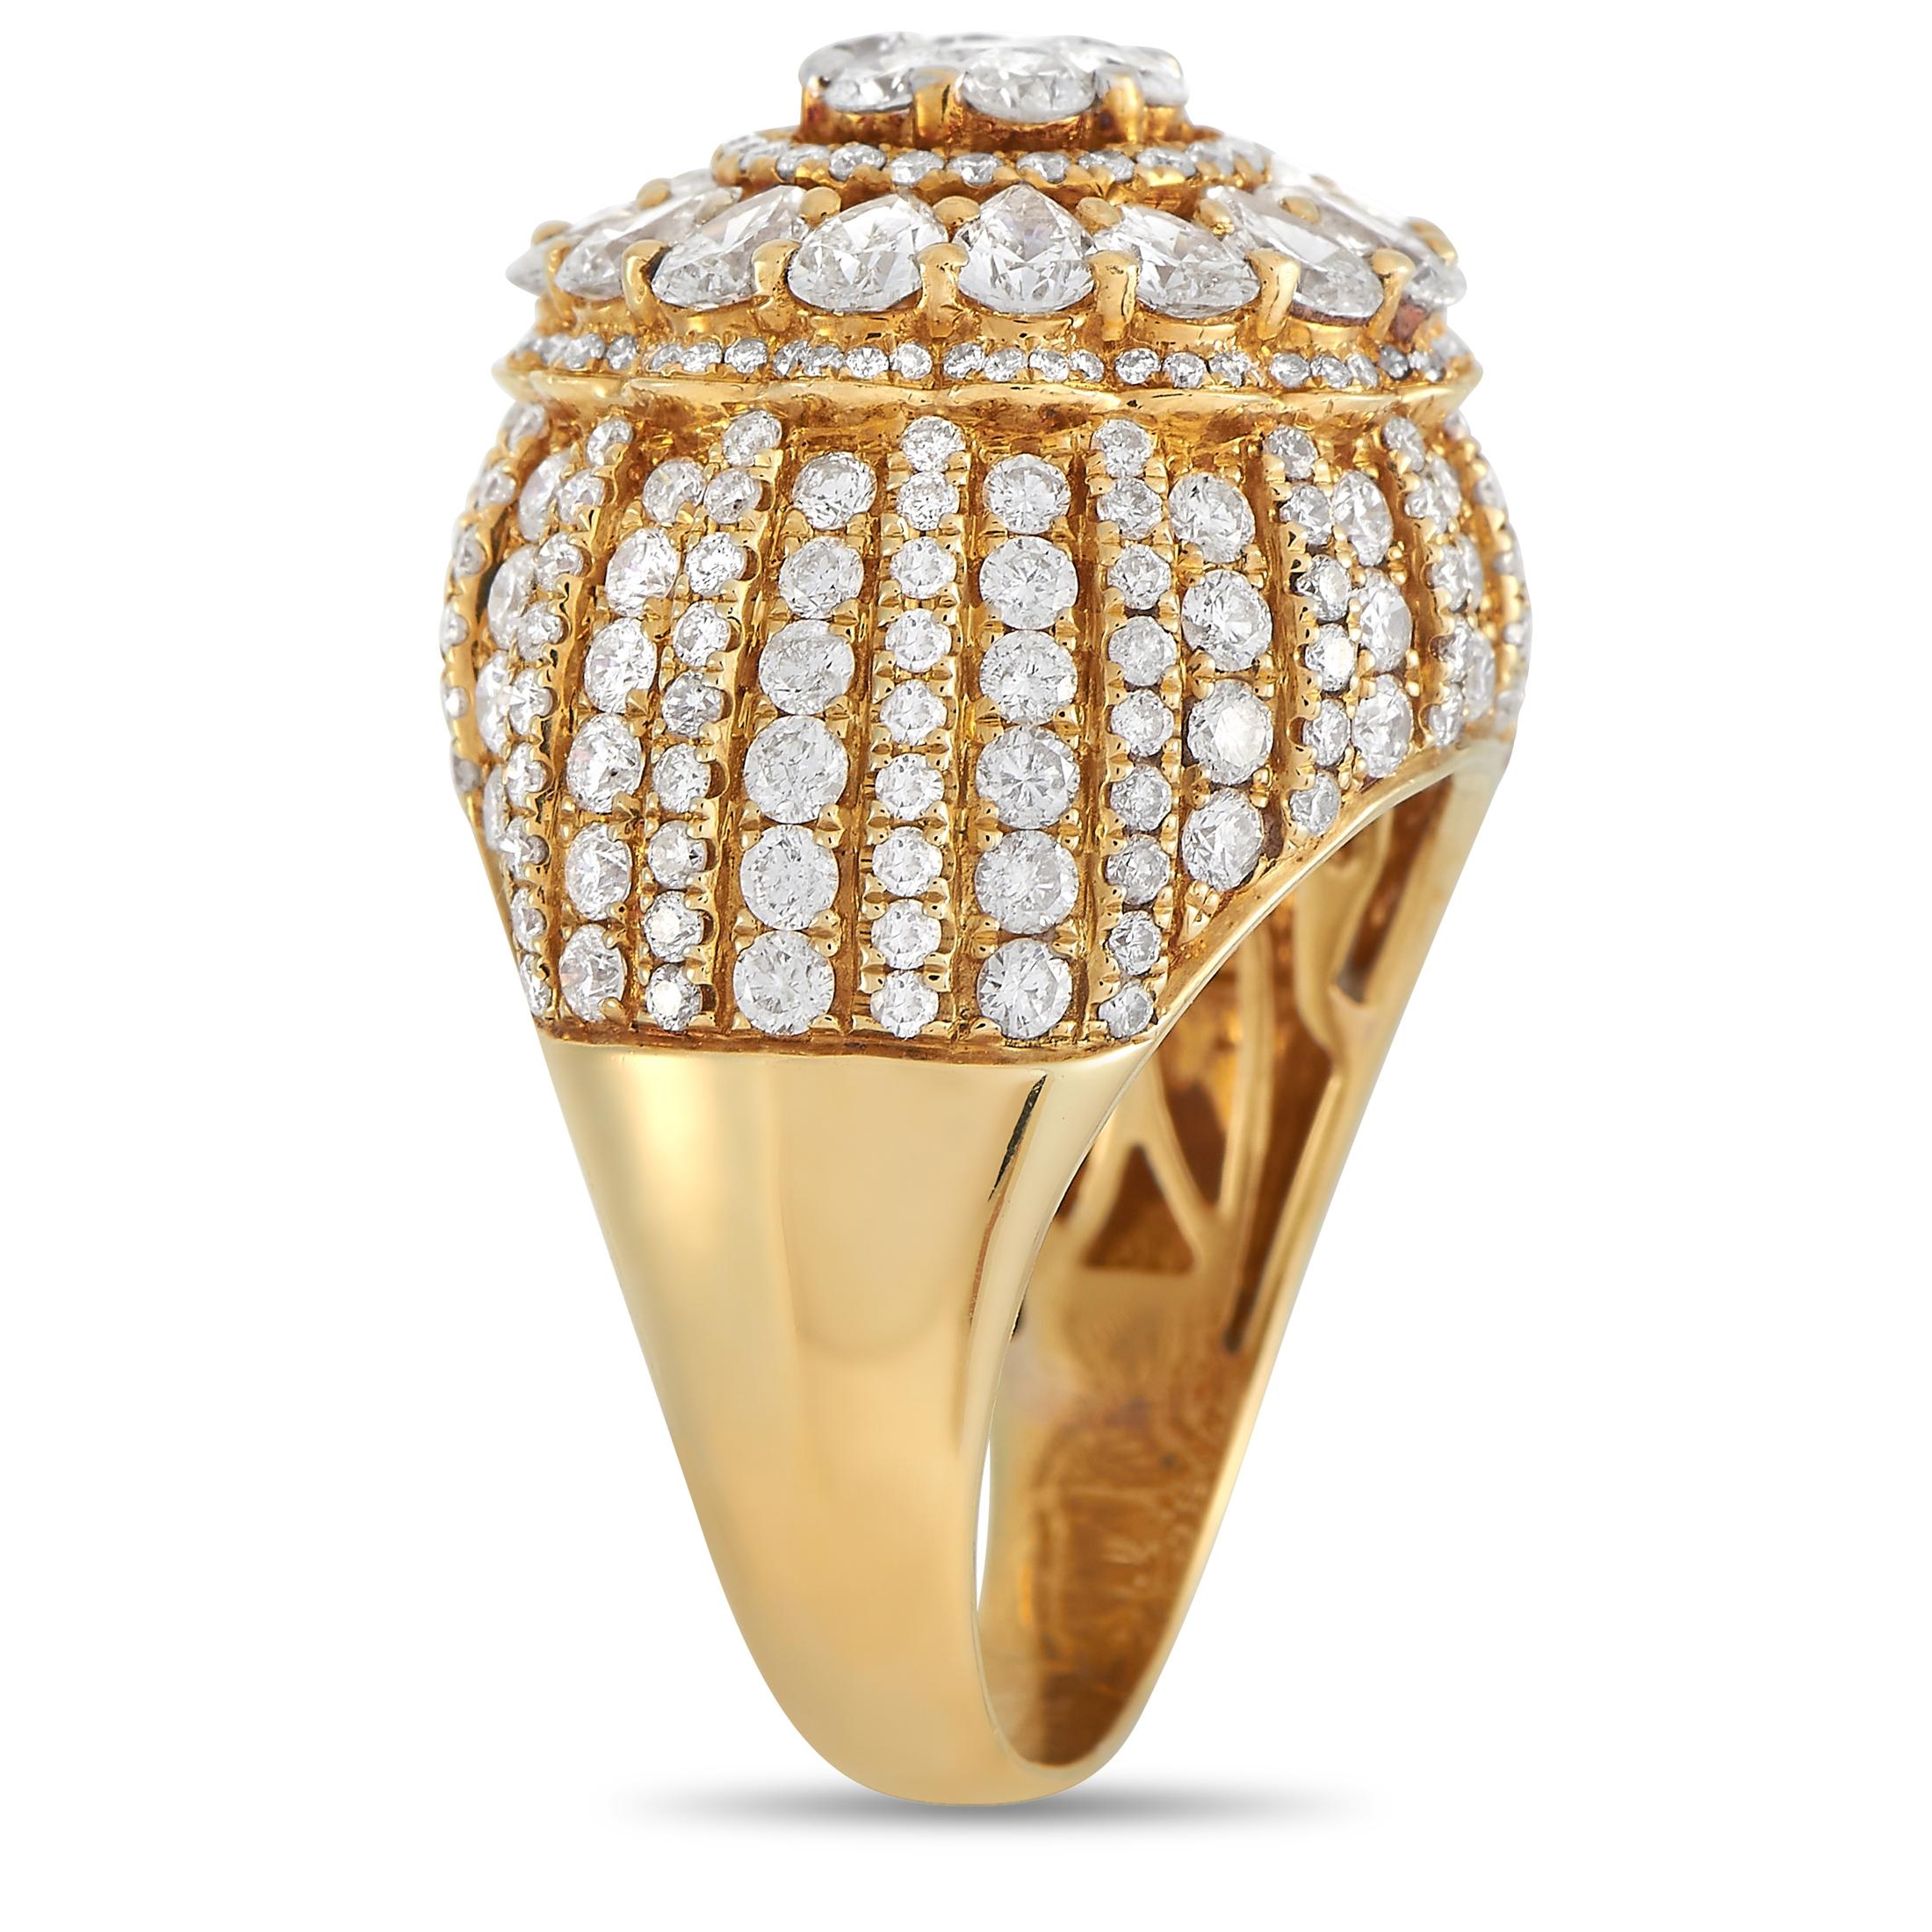 This stunning LB Exclusive 14K Yellow Gold 3.00 ct Diamond Ring is effortlessly elegant. The ring is made with 14K yellow gold and set with rows of small round-cut diamonds over the front of the band. The face of the ring is set with a cluster of